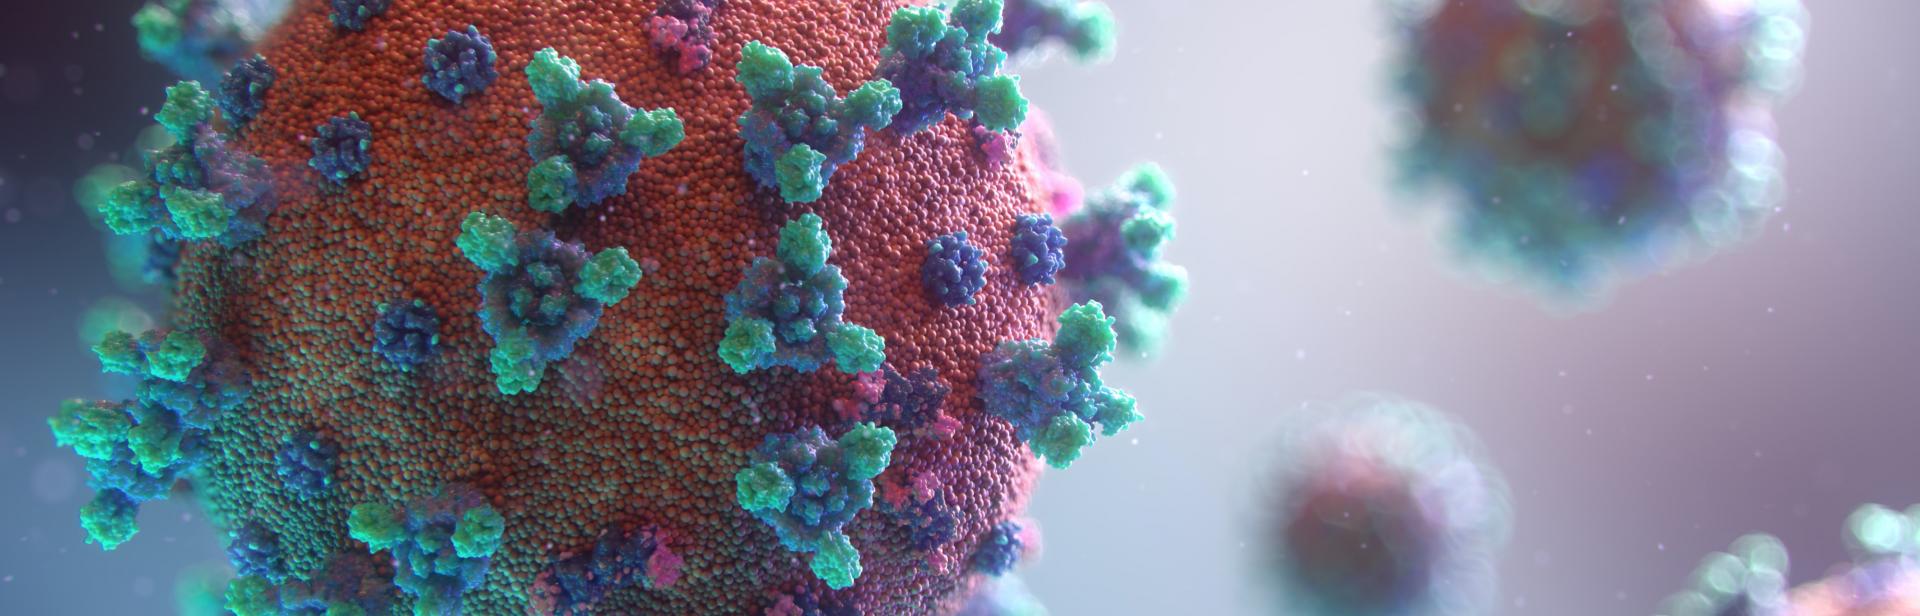 A macro photograph of a virus with spike proteins 